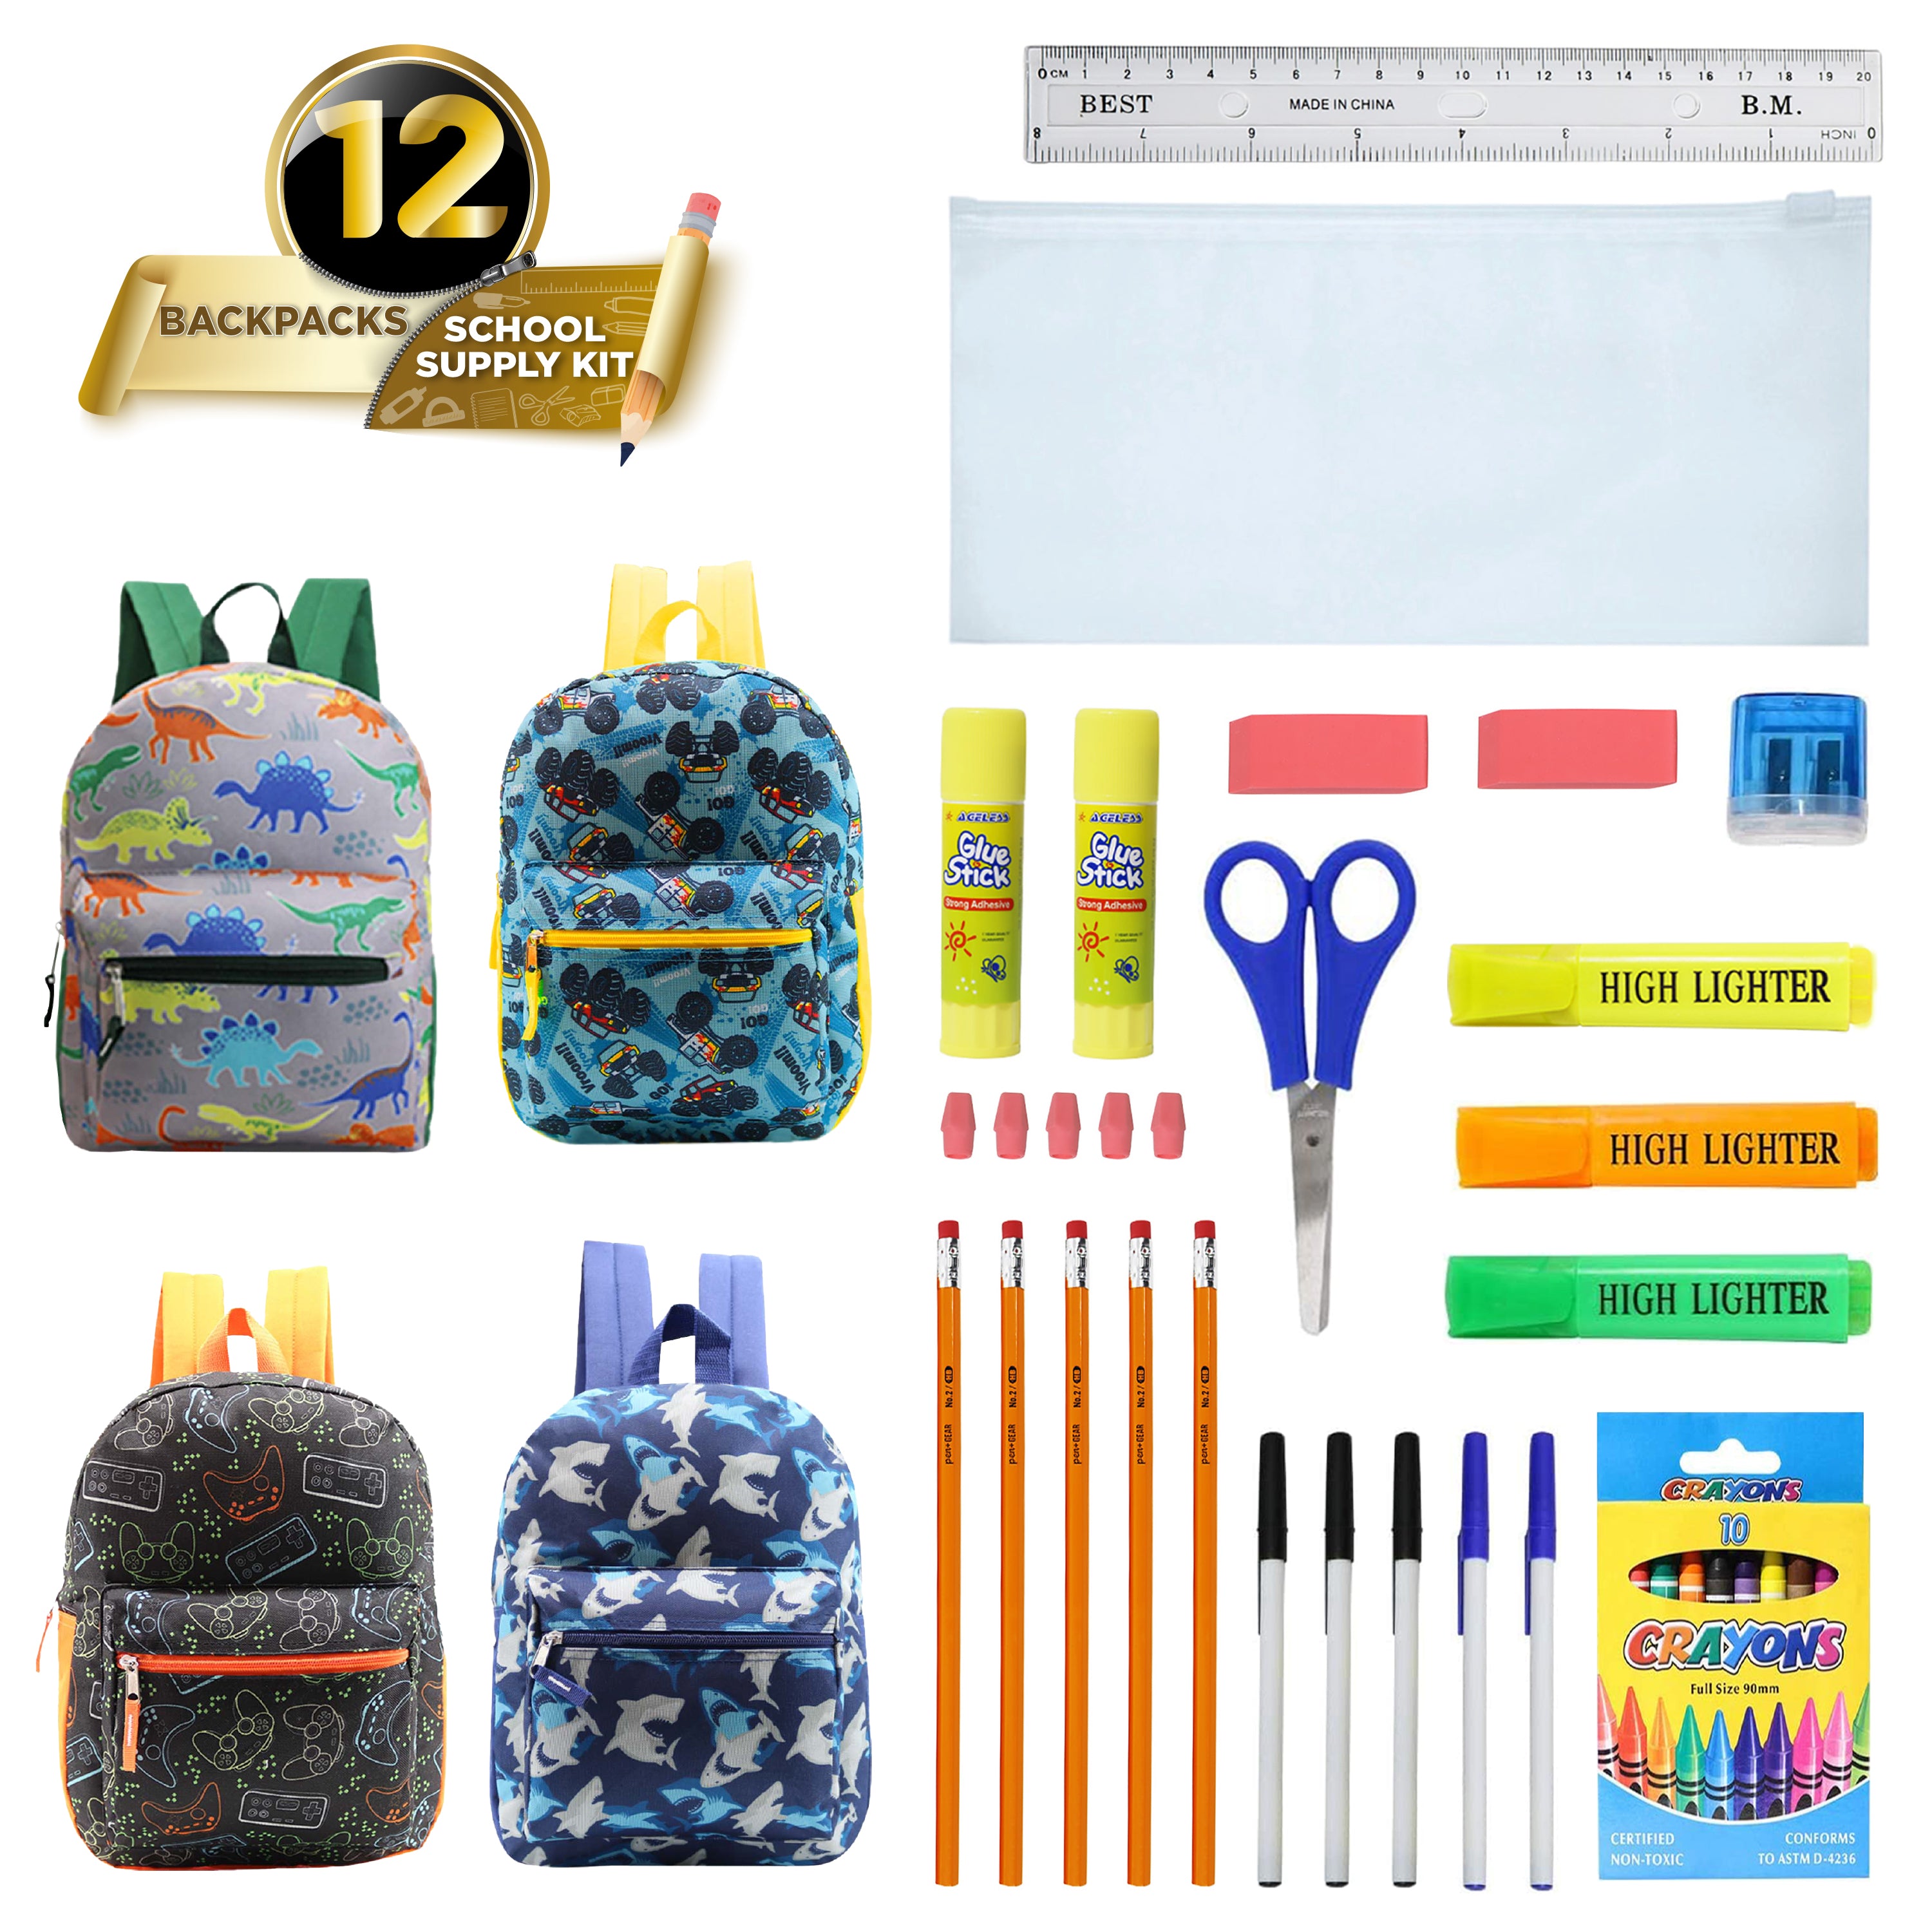 15 inches School Backpacks for Kids In Assorted Prints Bulk School Supplies - Kit Case Of 12